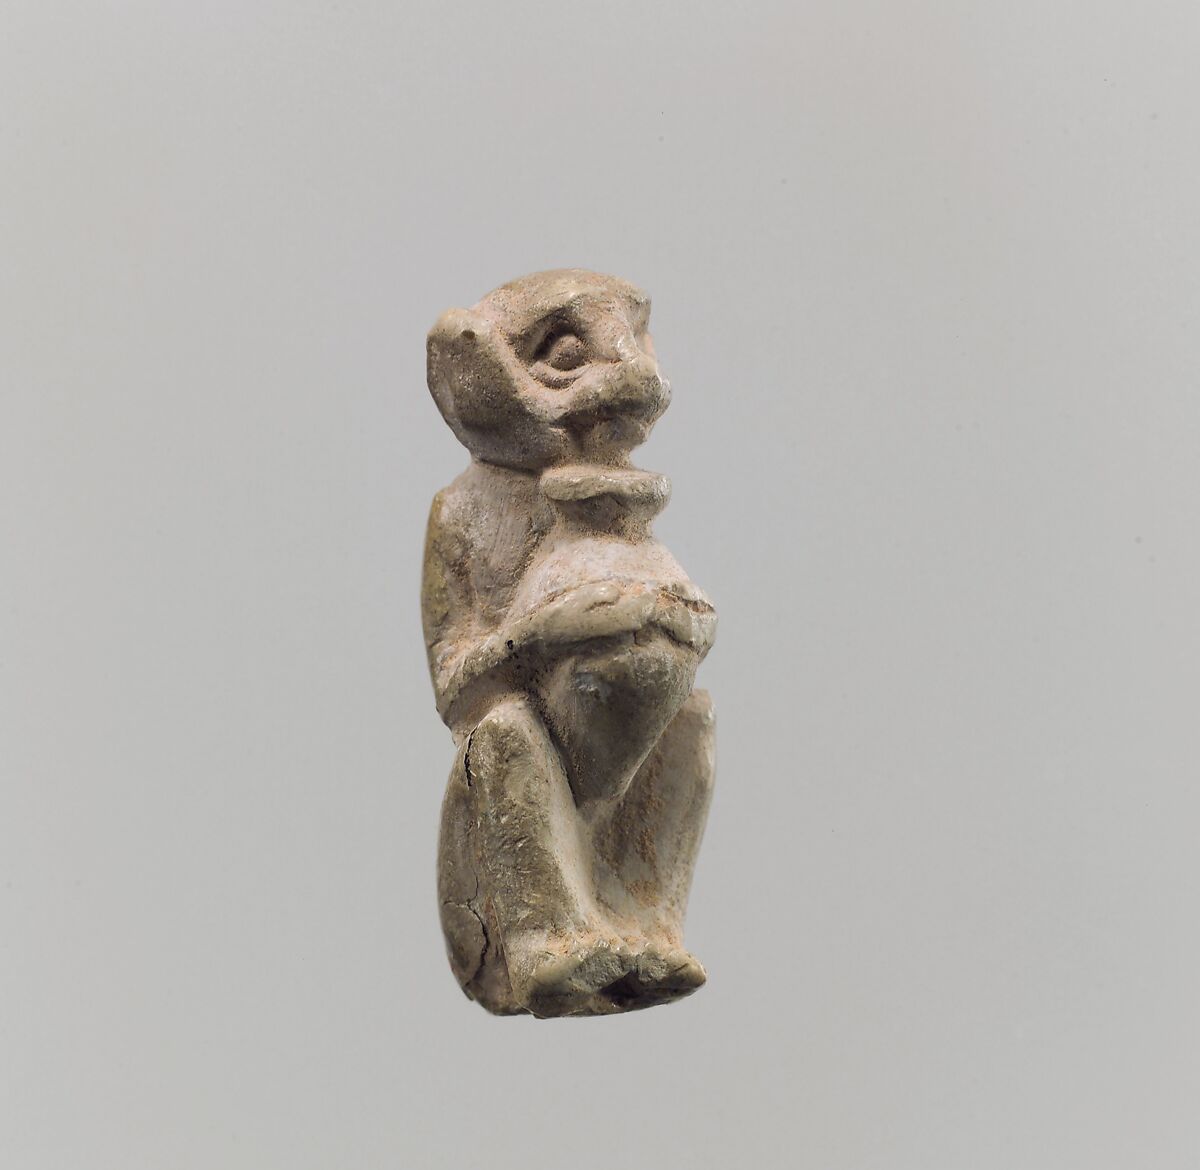 Monkey holding vessel, Ivory, Old Assyrian Trading Colony 